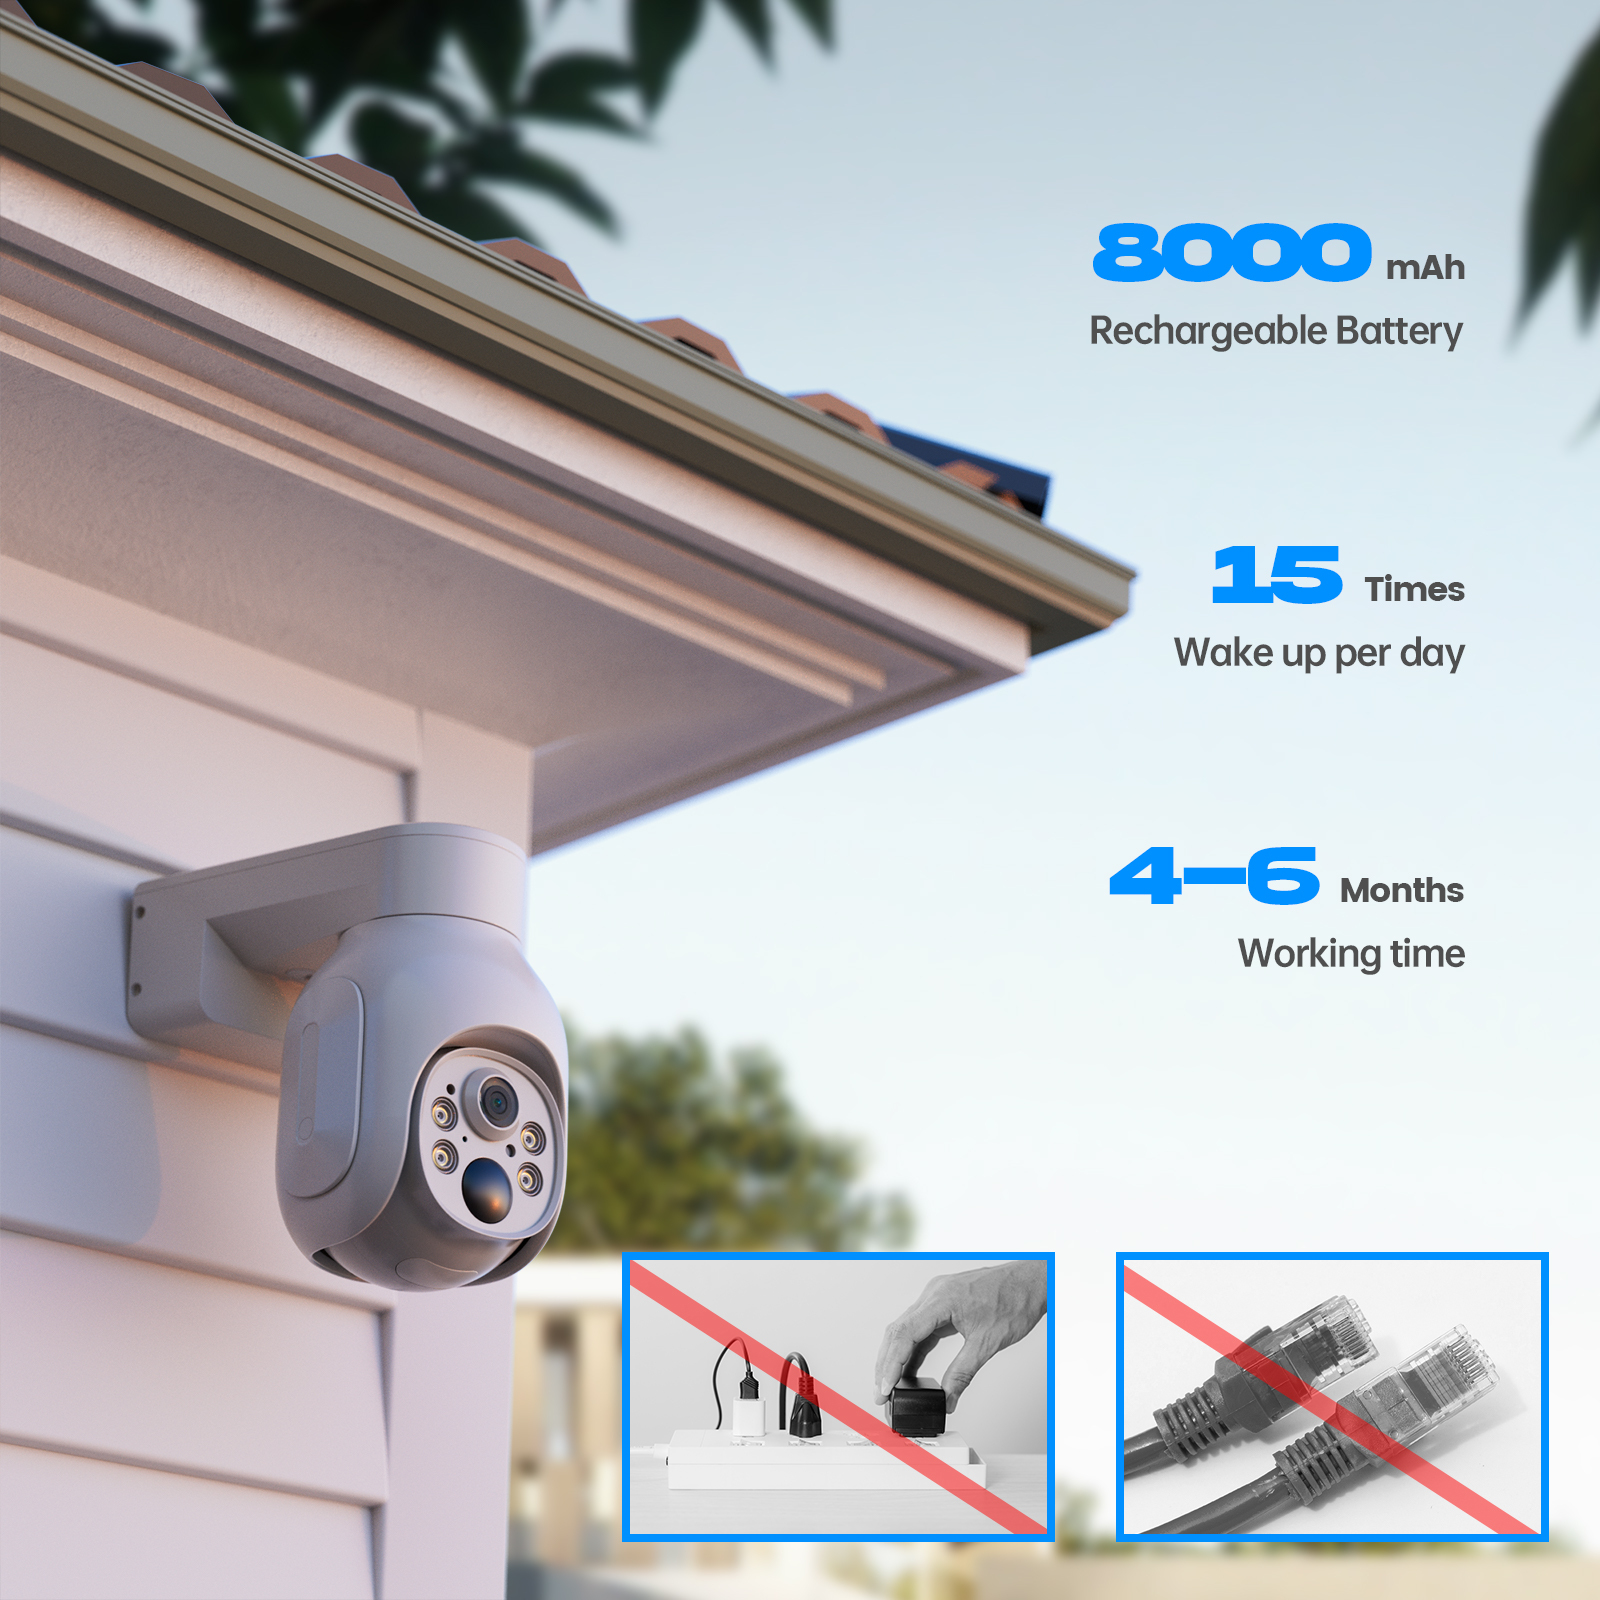 Toguard Solar Wireless Security Camera System Outdoor Battery Bullet Surveillance Camera Wireless Connector (Only supports 2.4Ghz WiFi) - image 3 of 8